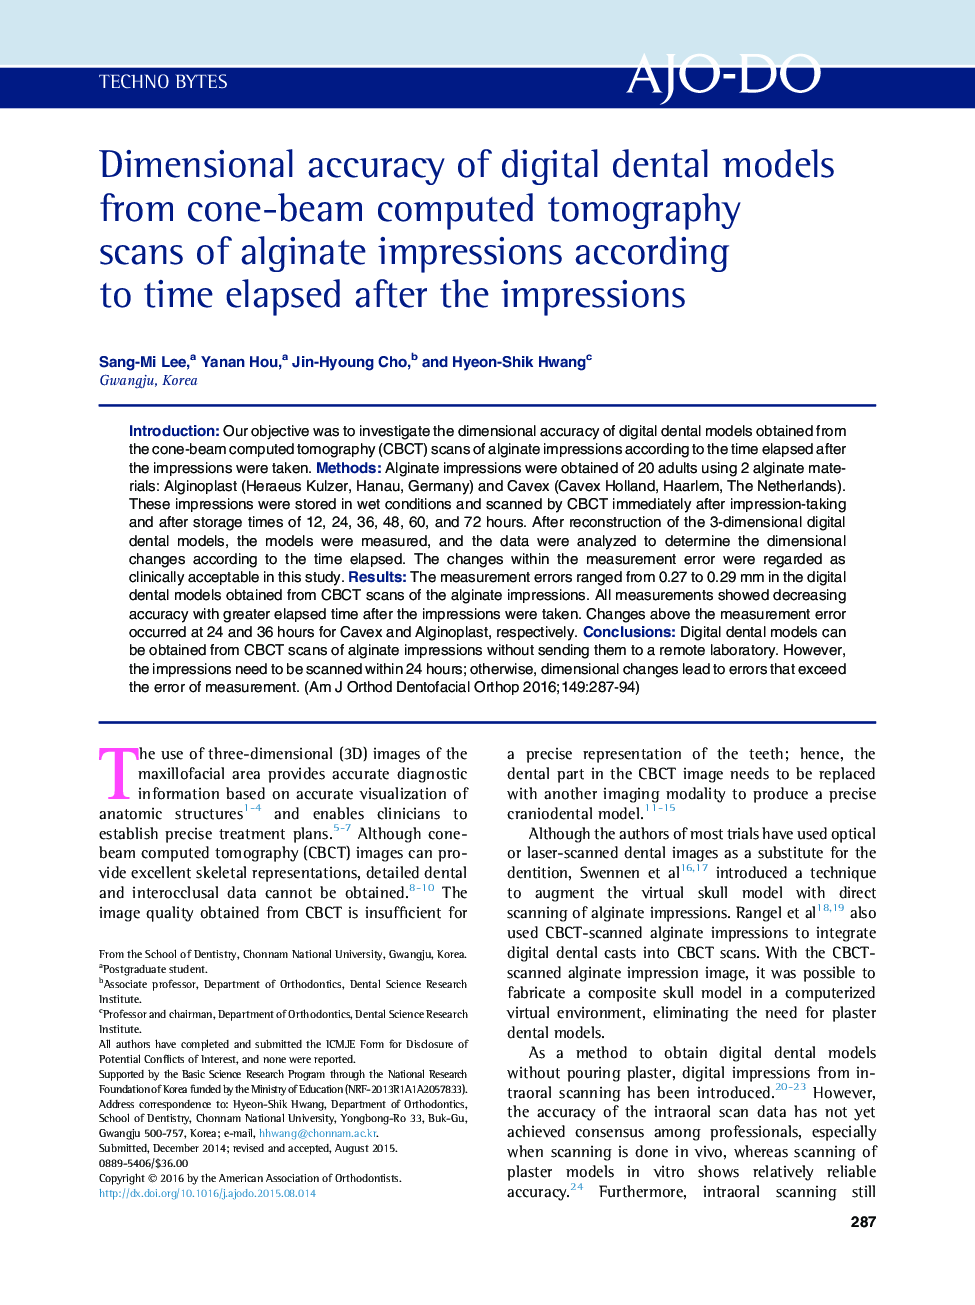 Dimensional accuracy of digital dental models from cone-beam computed tomography scans of alginate impressions according to time elapsed after the impressions 